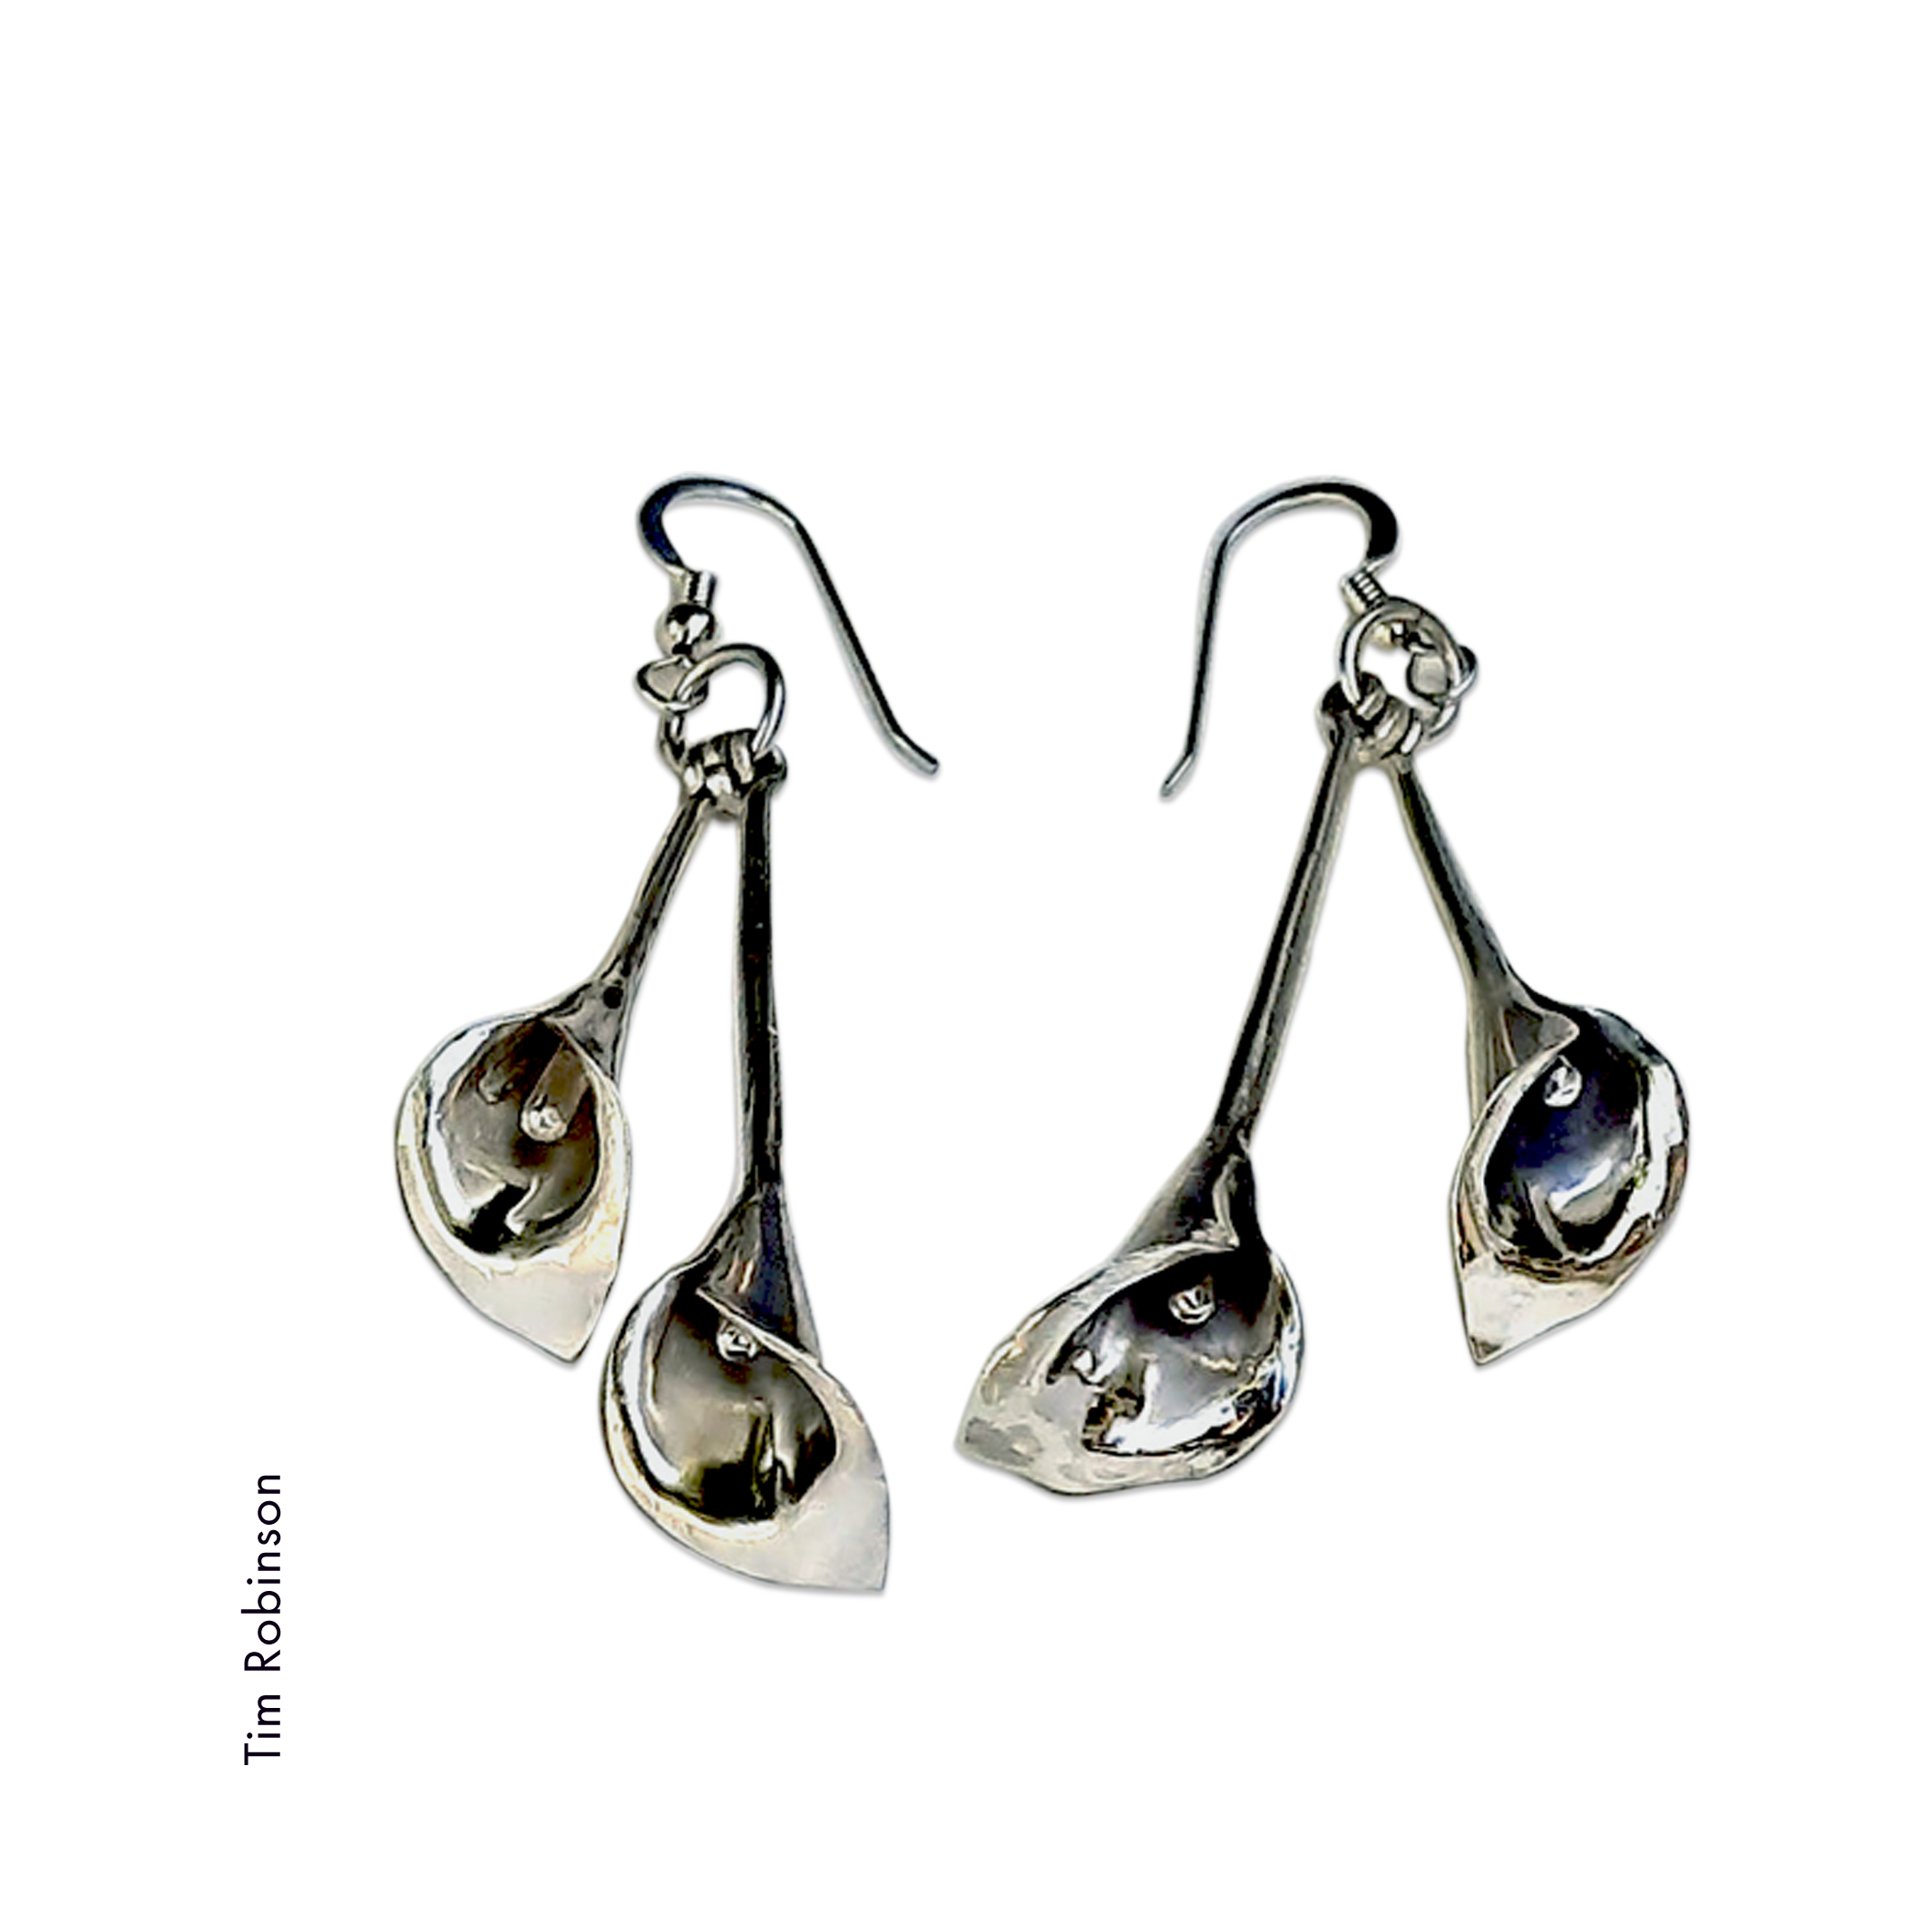 Tim Robinson made these double down facing cala lily sterling silver earrings